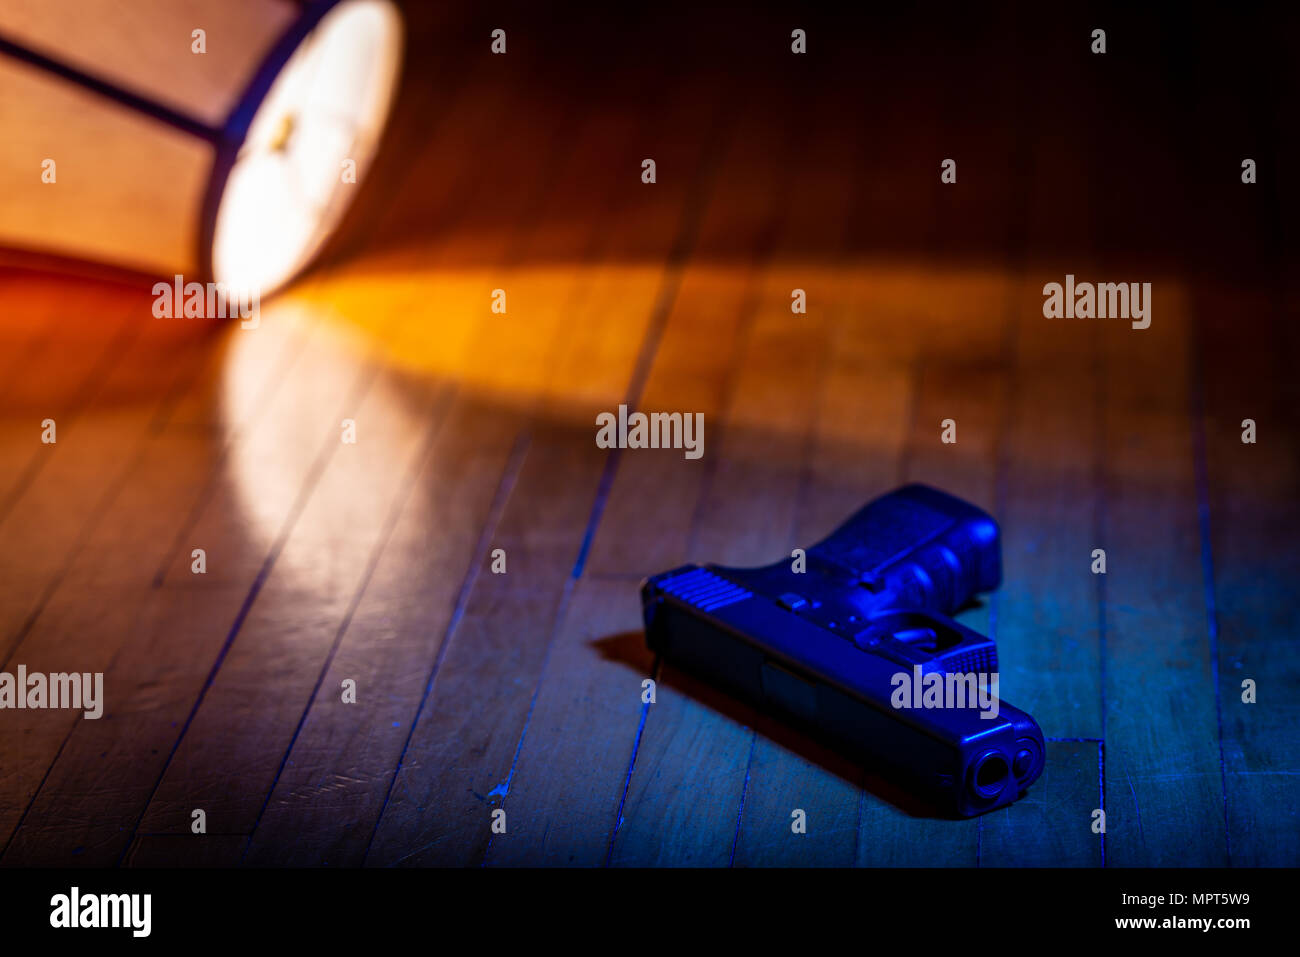 A firearm lays on the wood floor in front of a lamp which has been knocked over. Stock Photo